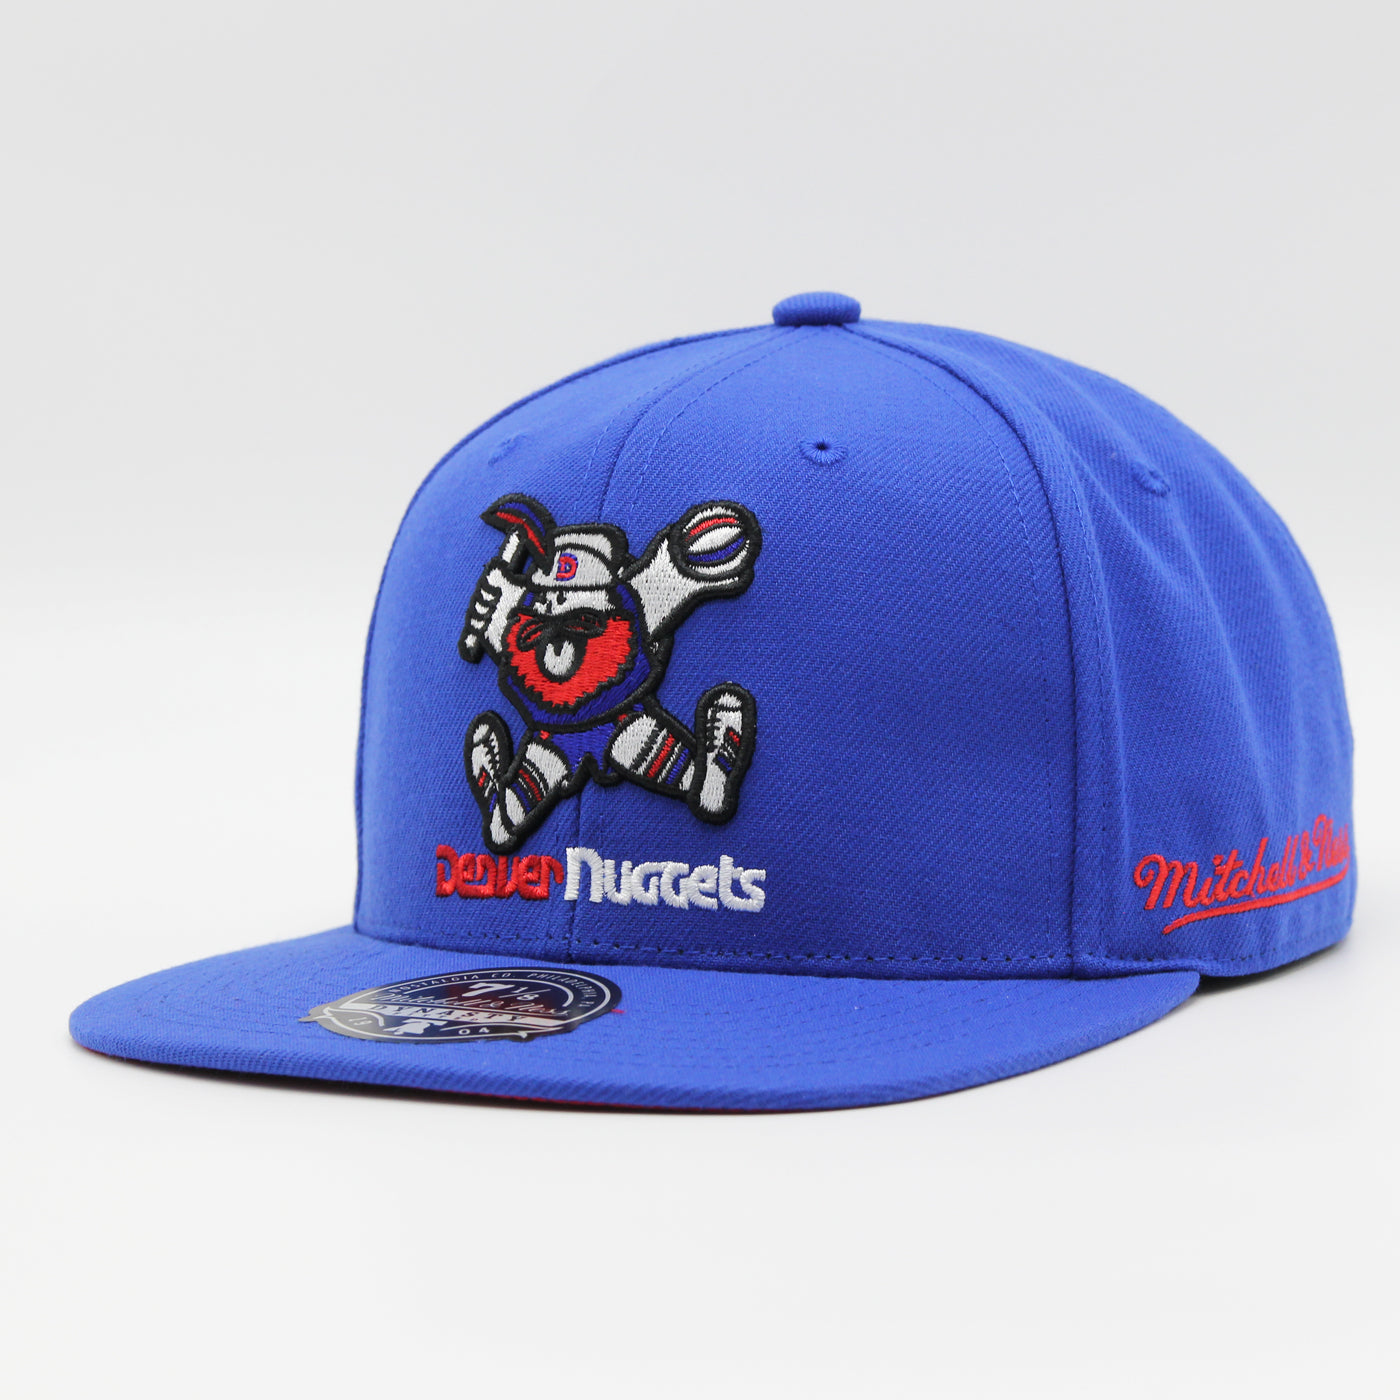 Mitchell & Ness Logo History fitted HWC D Nuggets blue